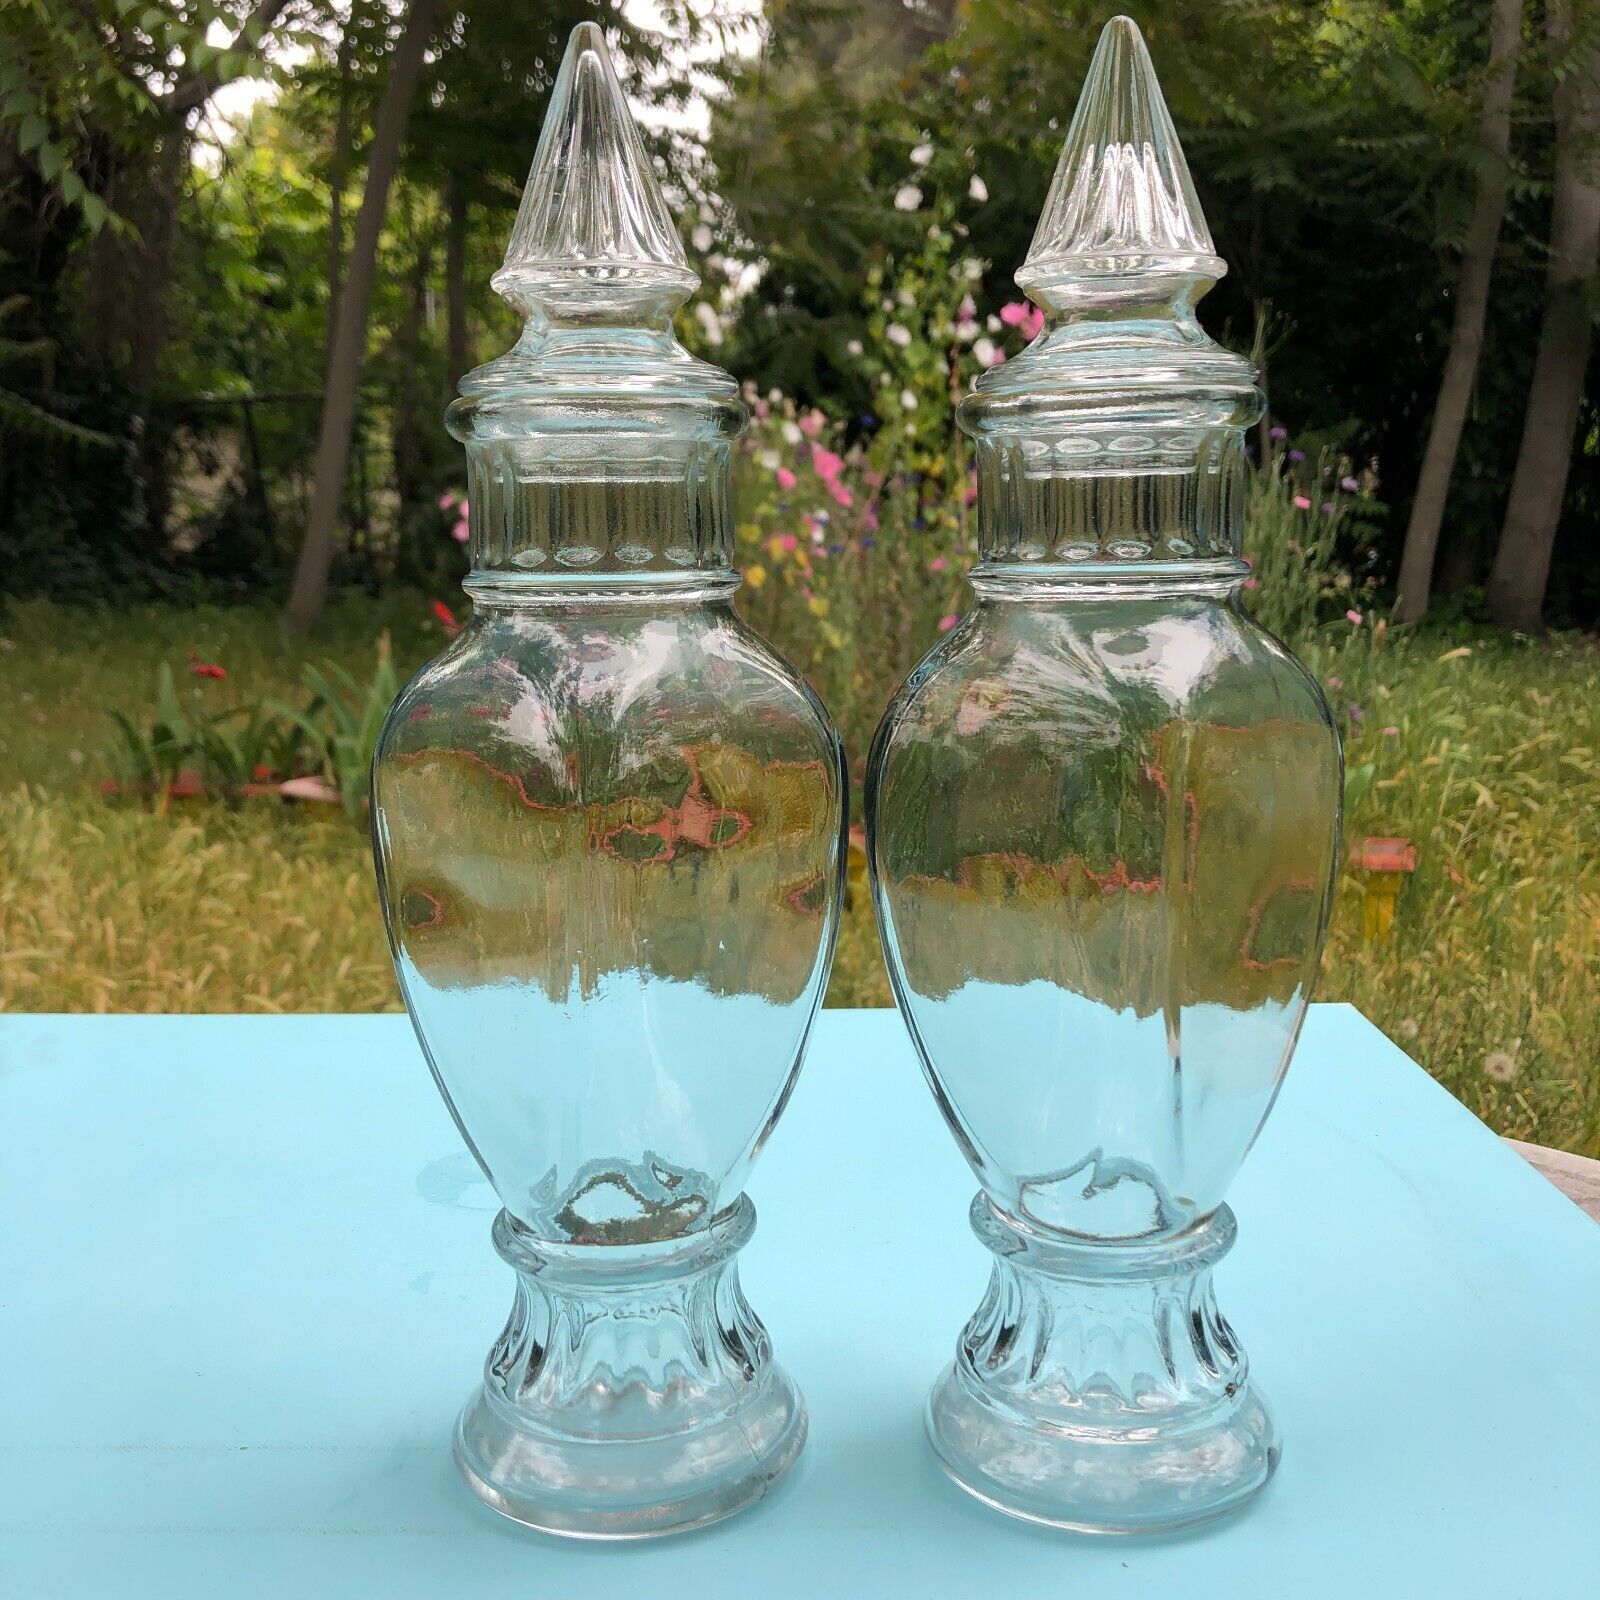 A Pair of Vintage Brachs Starlight Mints Apothecary Jars with Tops - 1960's